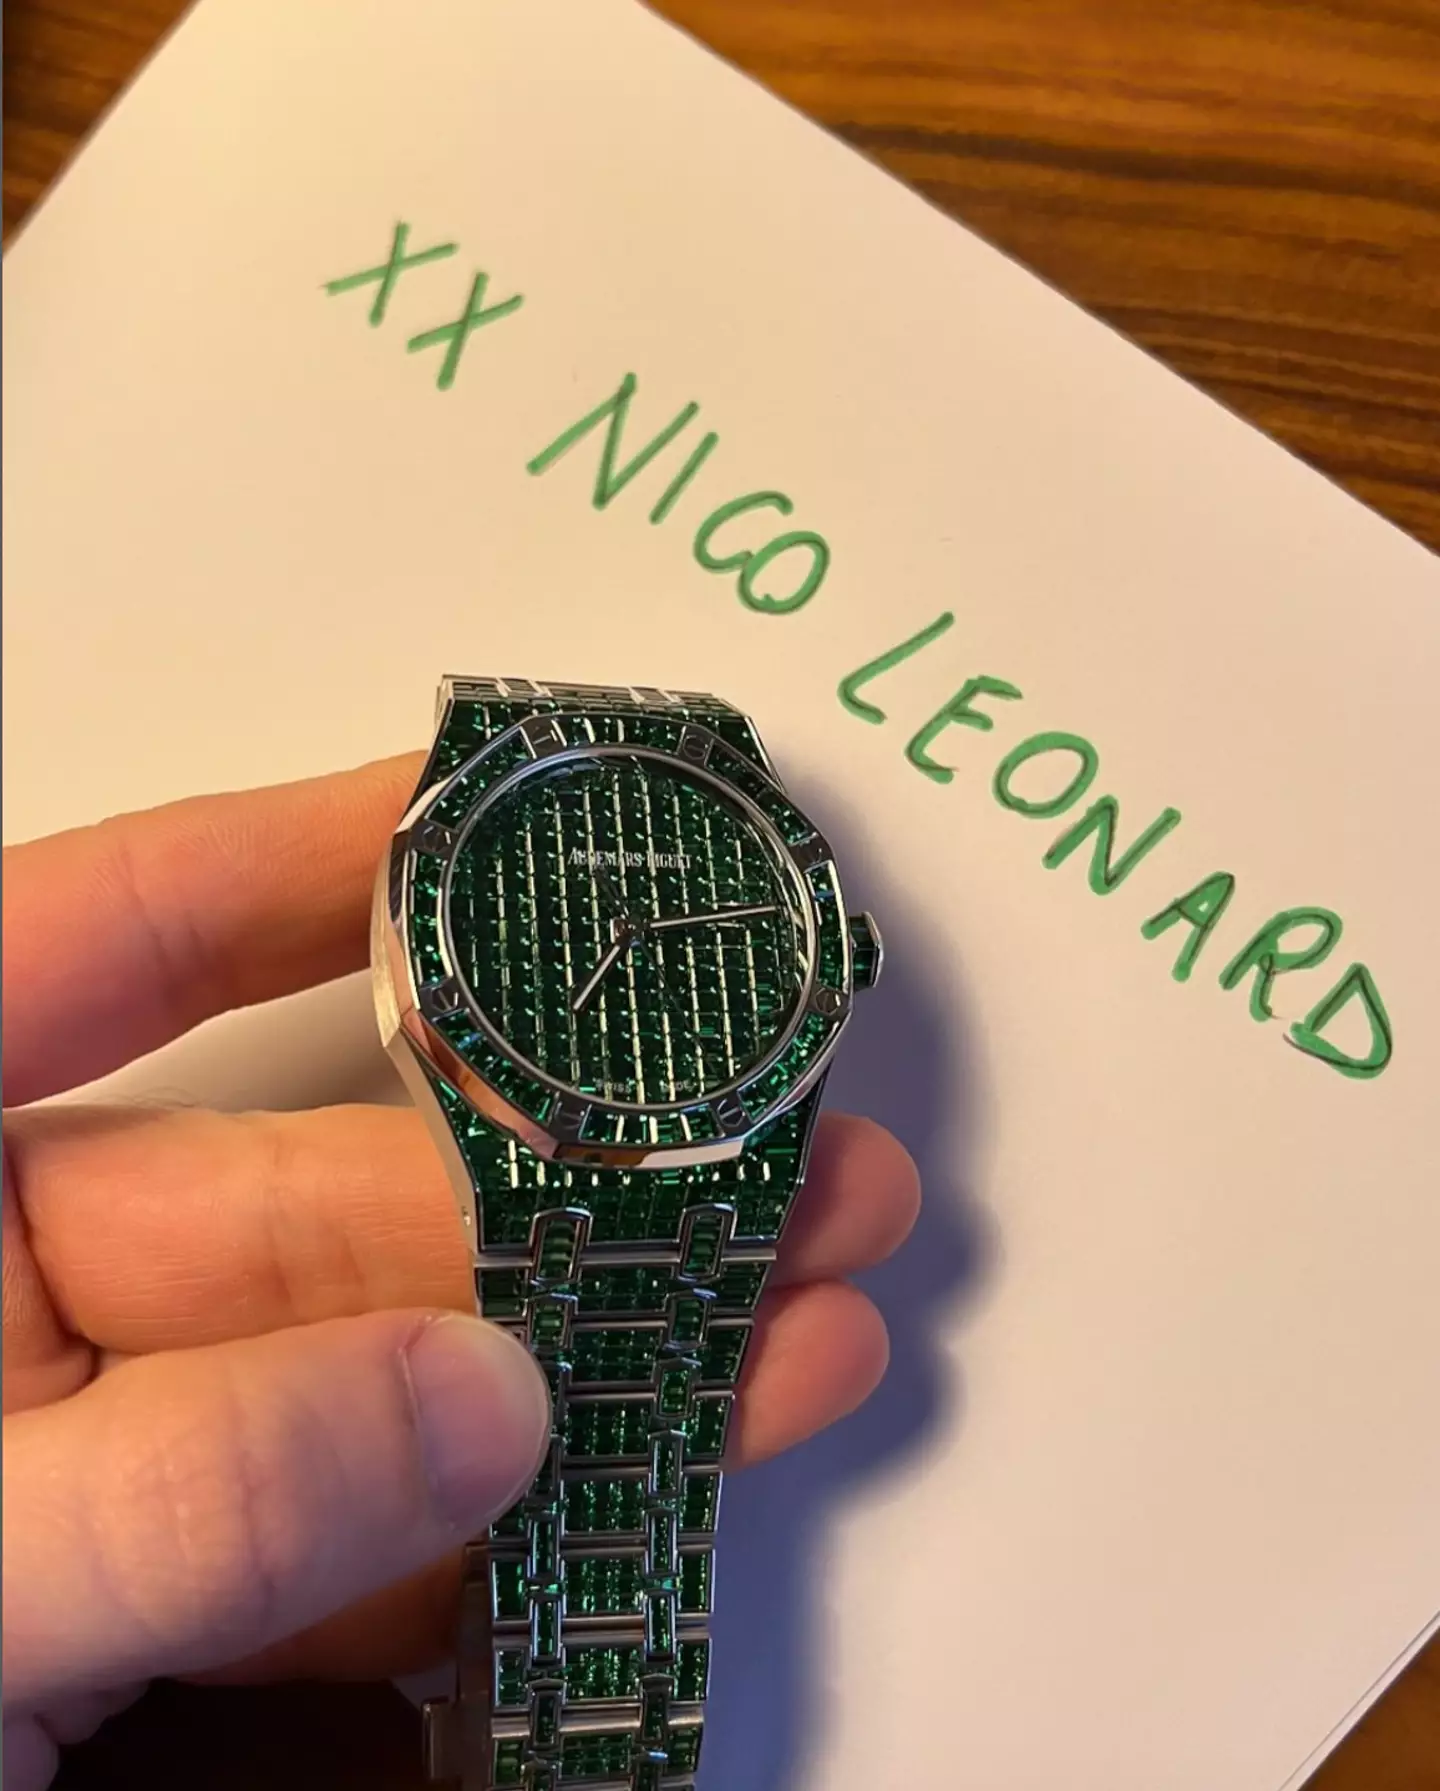 The expert took to Instagram to claim Rick Ross' designer watch is a fake, showing off a 'real' version.